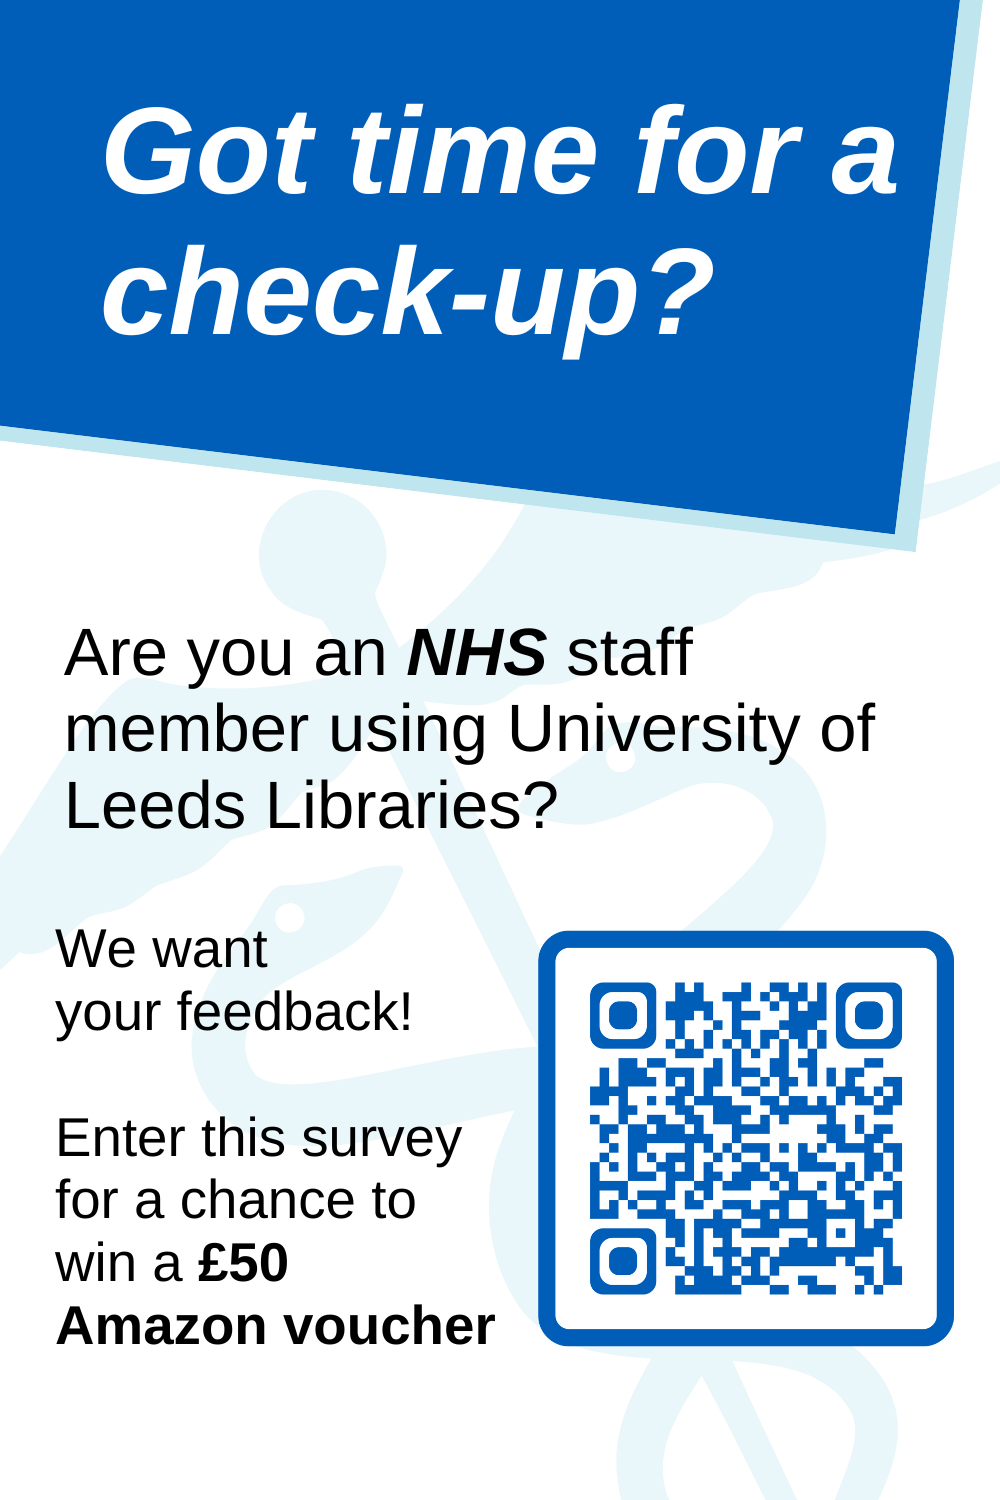 Got time for a check-up? Are you an NHS Staff member using University of Leeds Libraries? We want your feedback! Enter this survey for a chance to win a £50 Amazon voucher